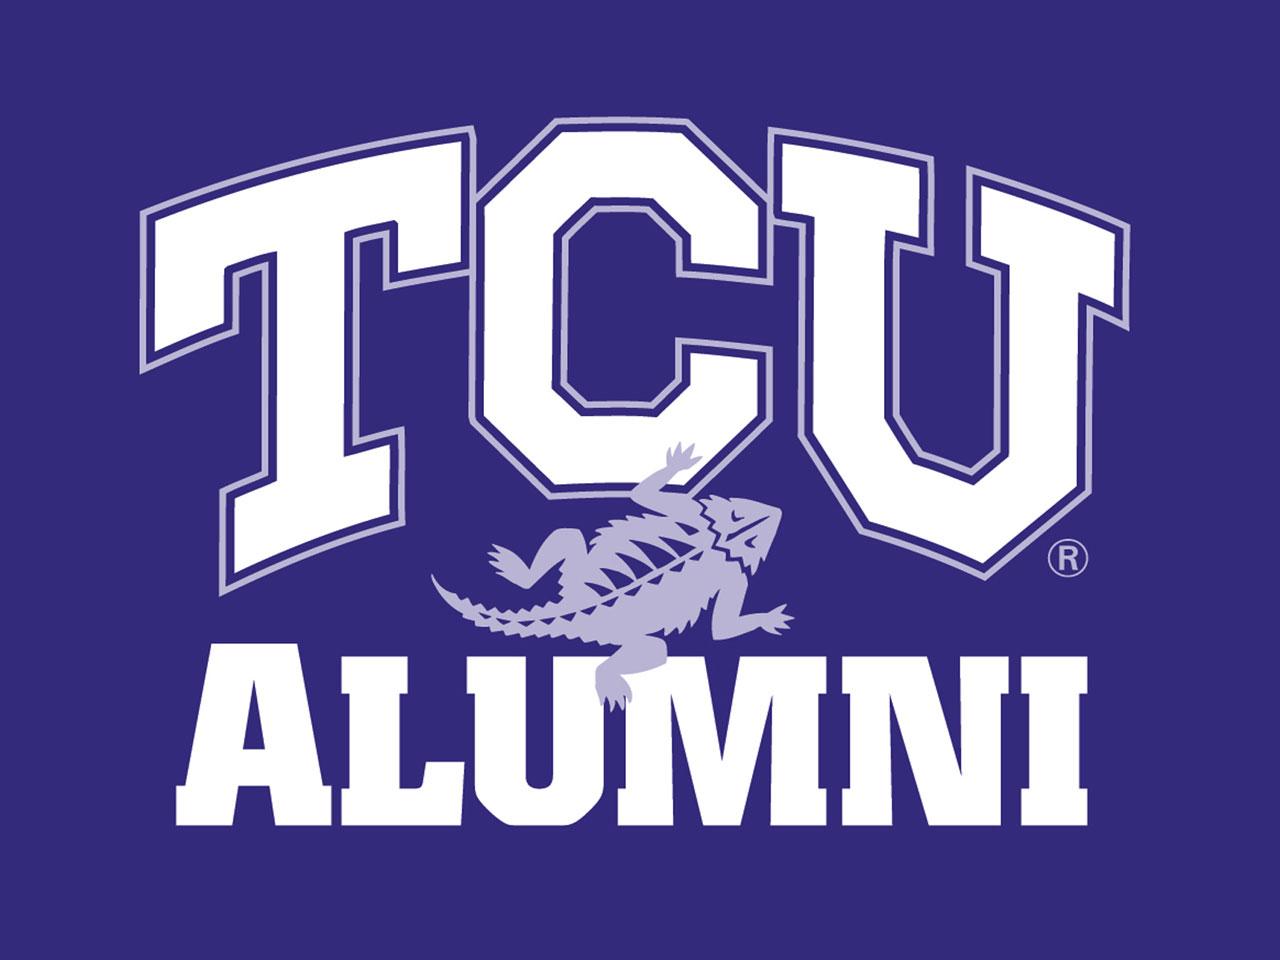 A busy recruiting weekend has TCU fans buzzing about the future of Frog  Football  Frogs O War